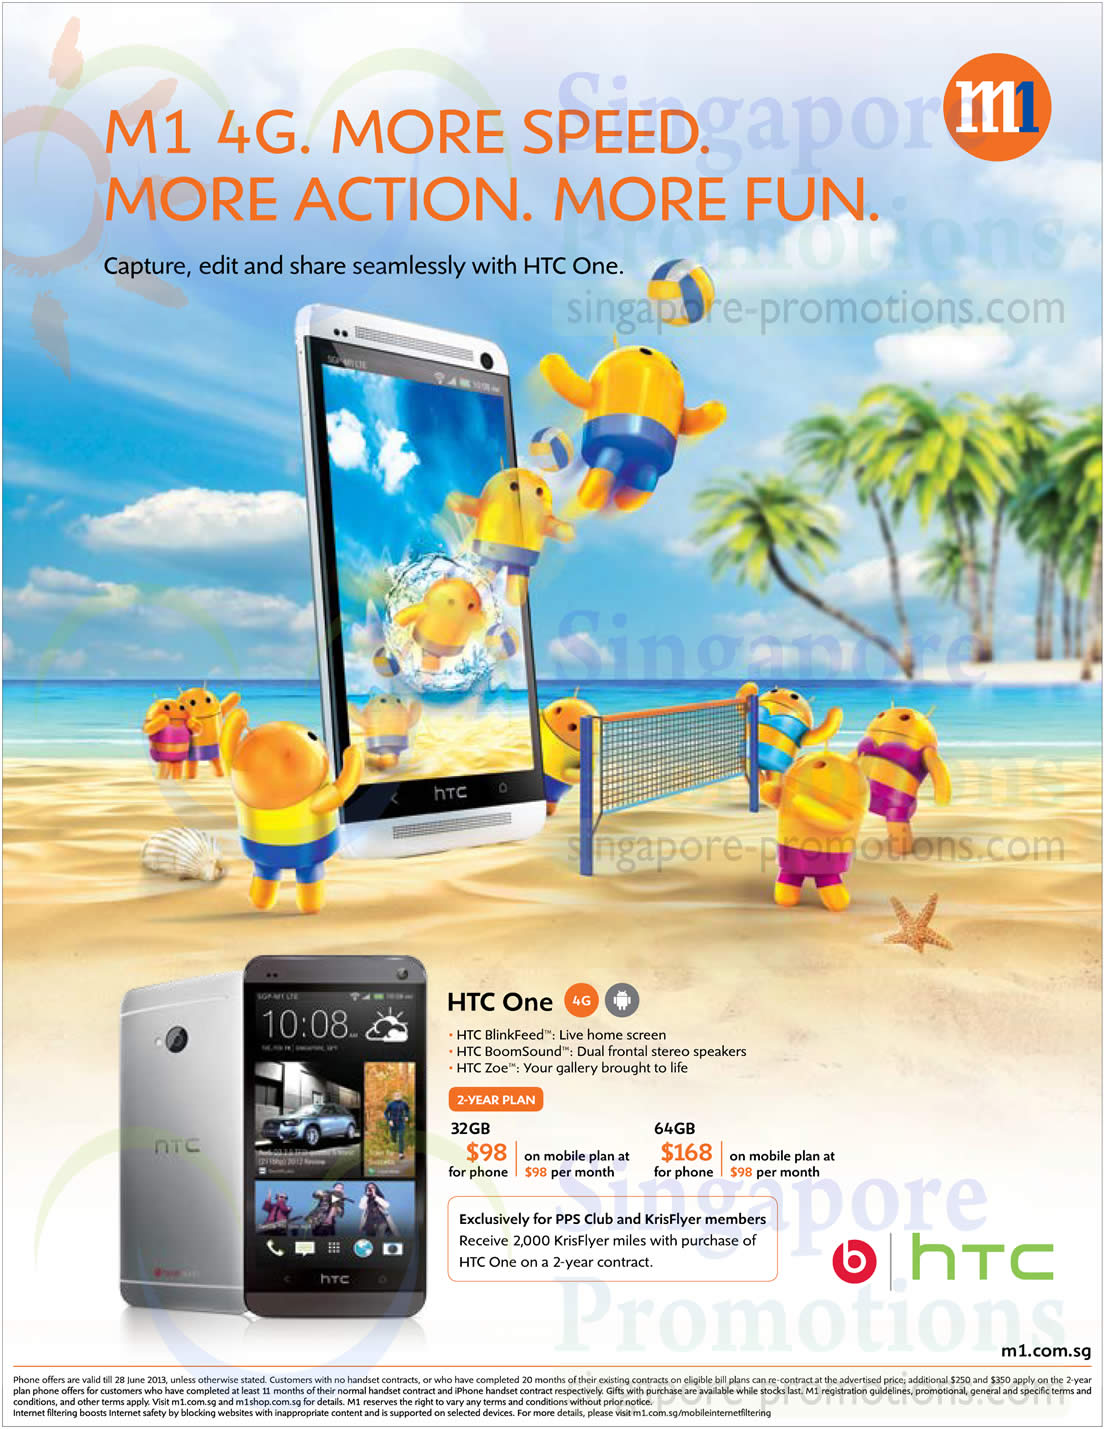 Featured image for M1 Smartphones, Tablets & Home/Mobile Broadband Offers 22 - 28 Jun 2013